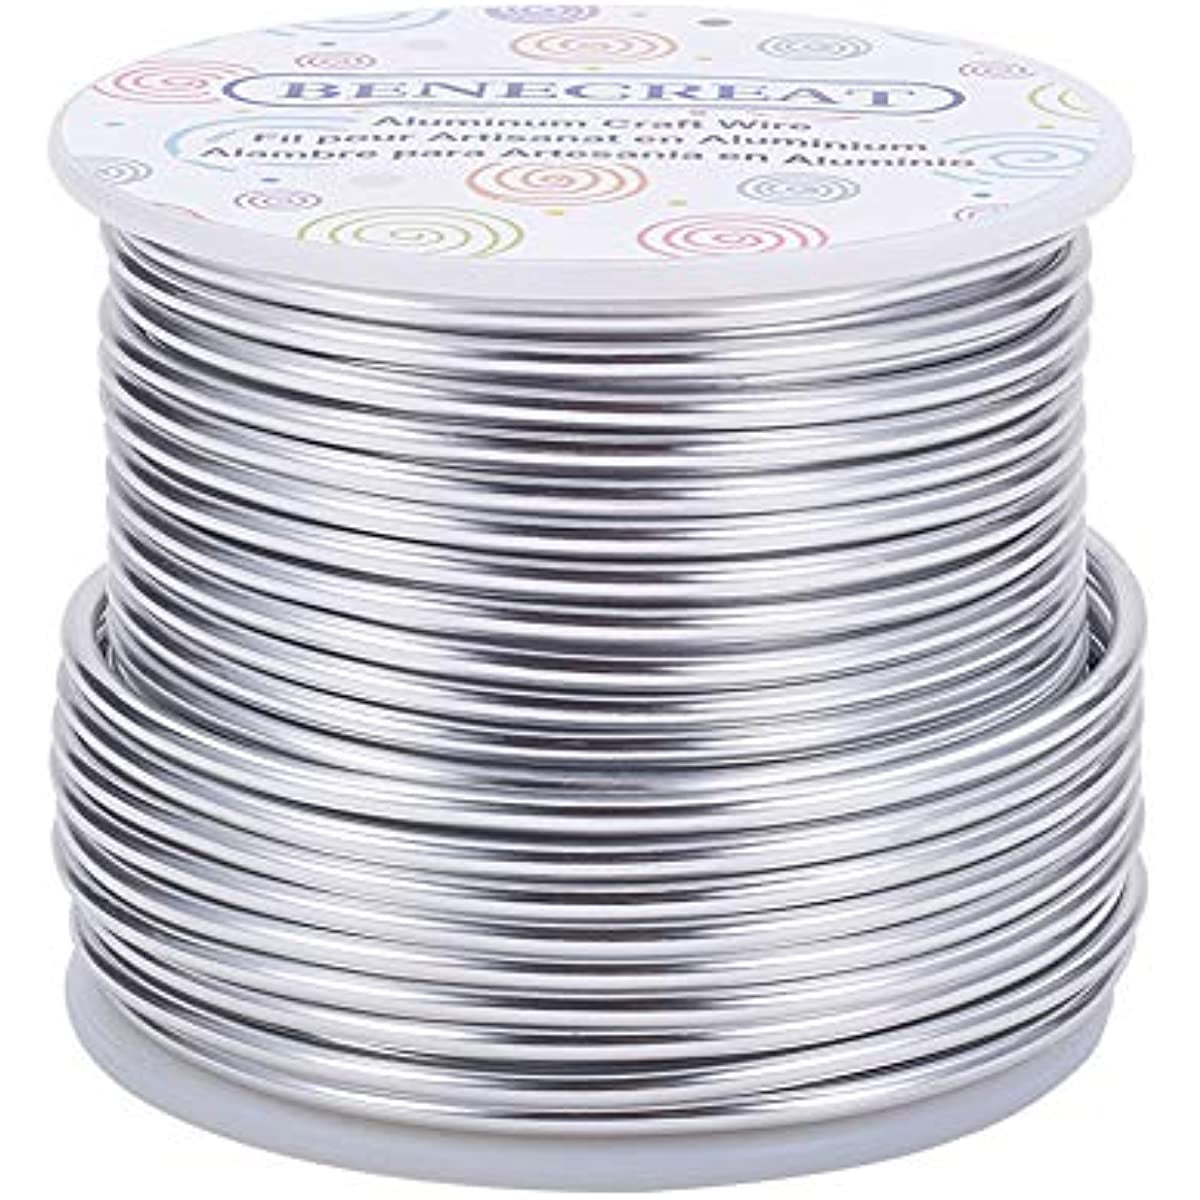 Inspirelle 18 Gauge 377 Feet Silver Aluminum Craft Wire Bendable Metal Wire  For Jewelry Craft Making